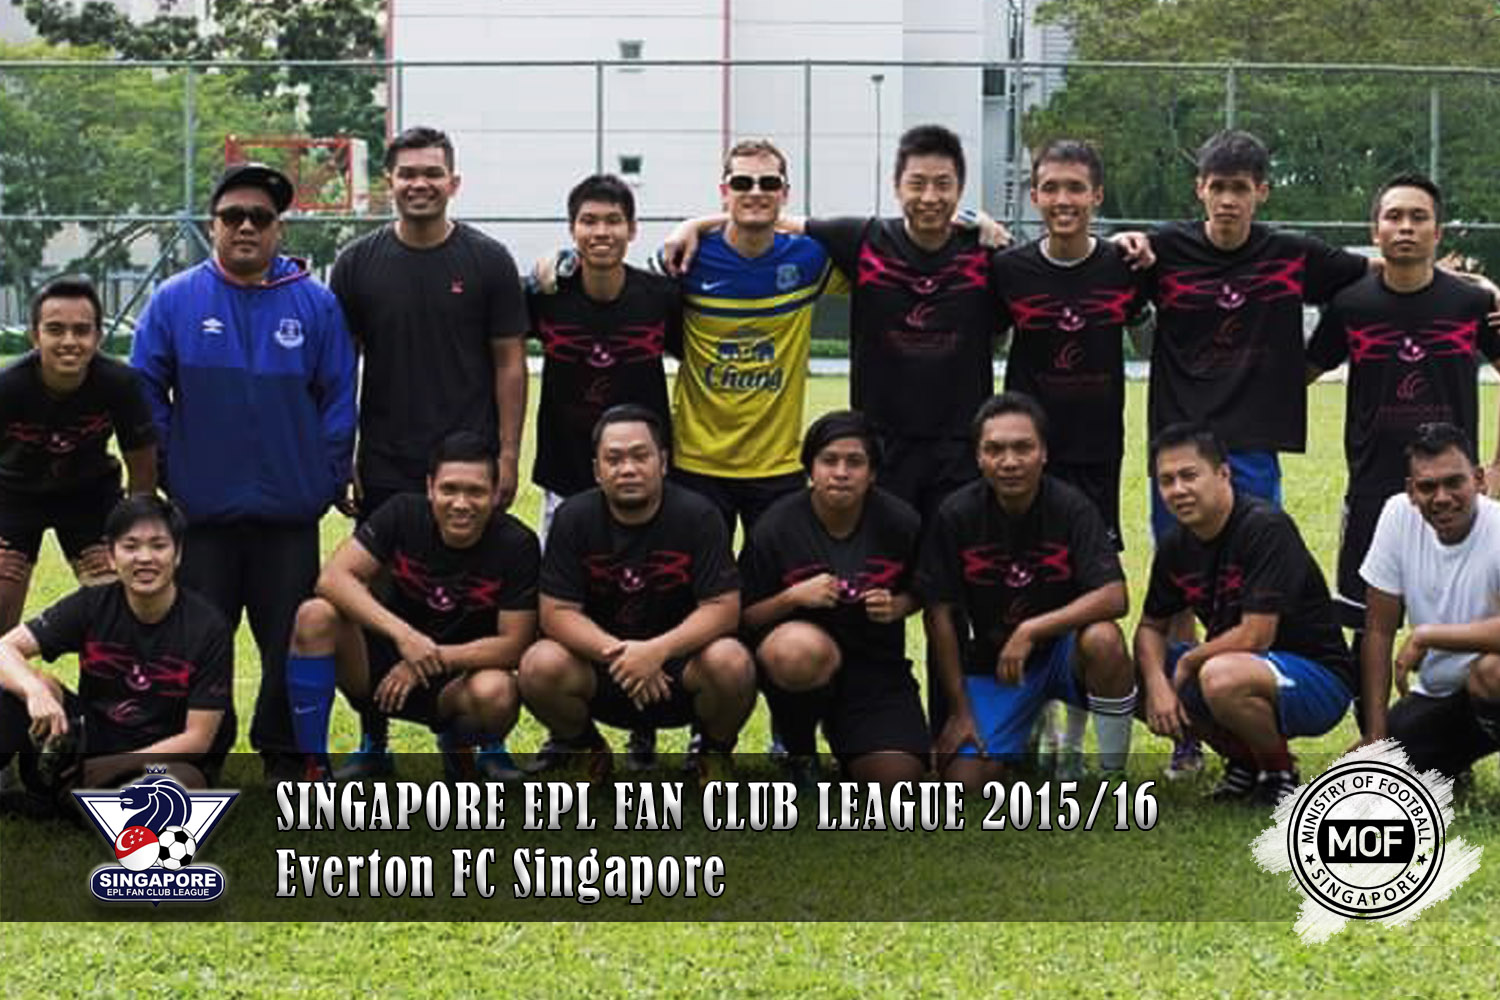 Singapore Everton Supporters Club